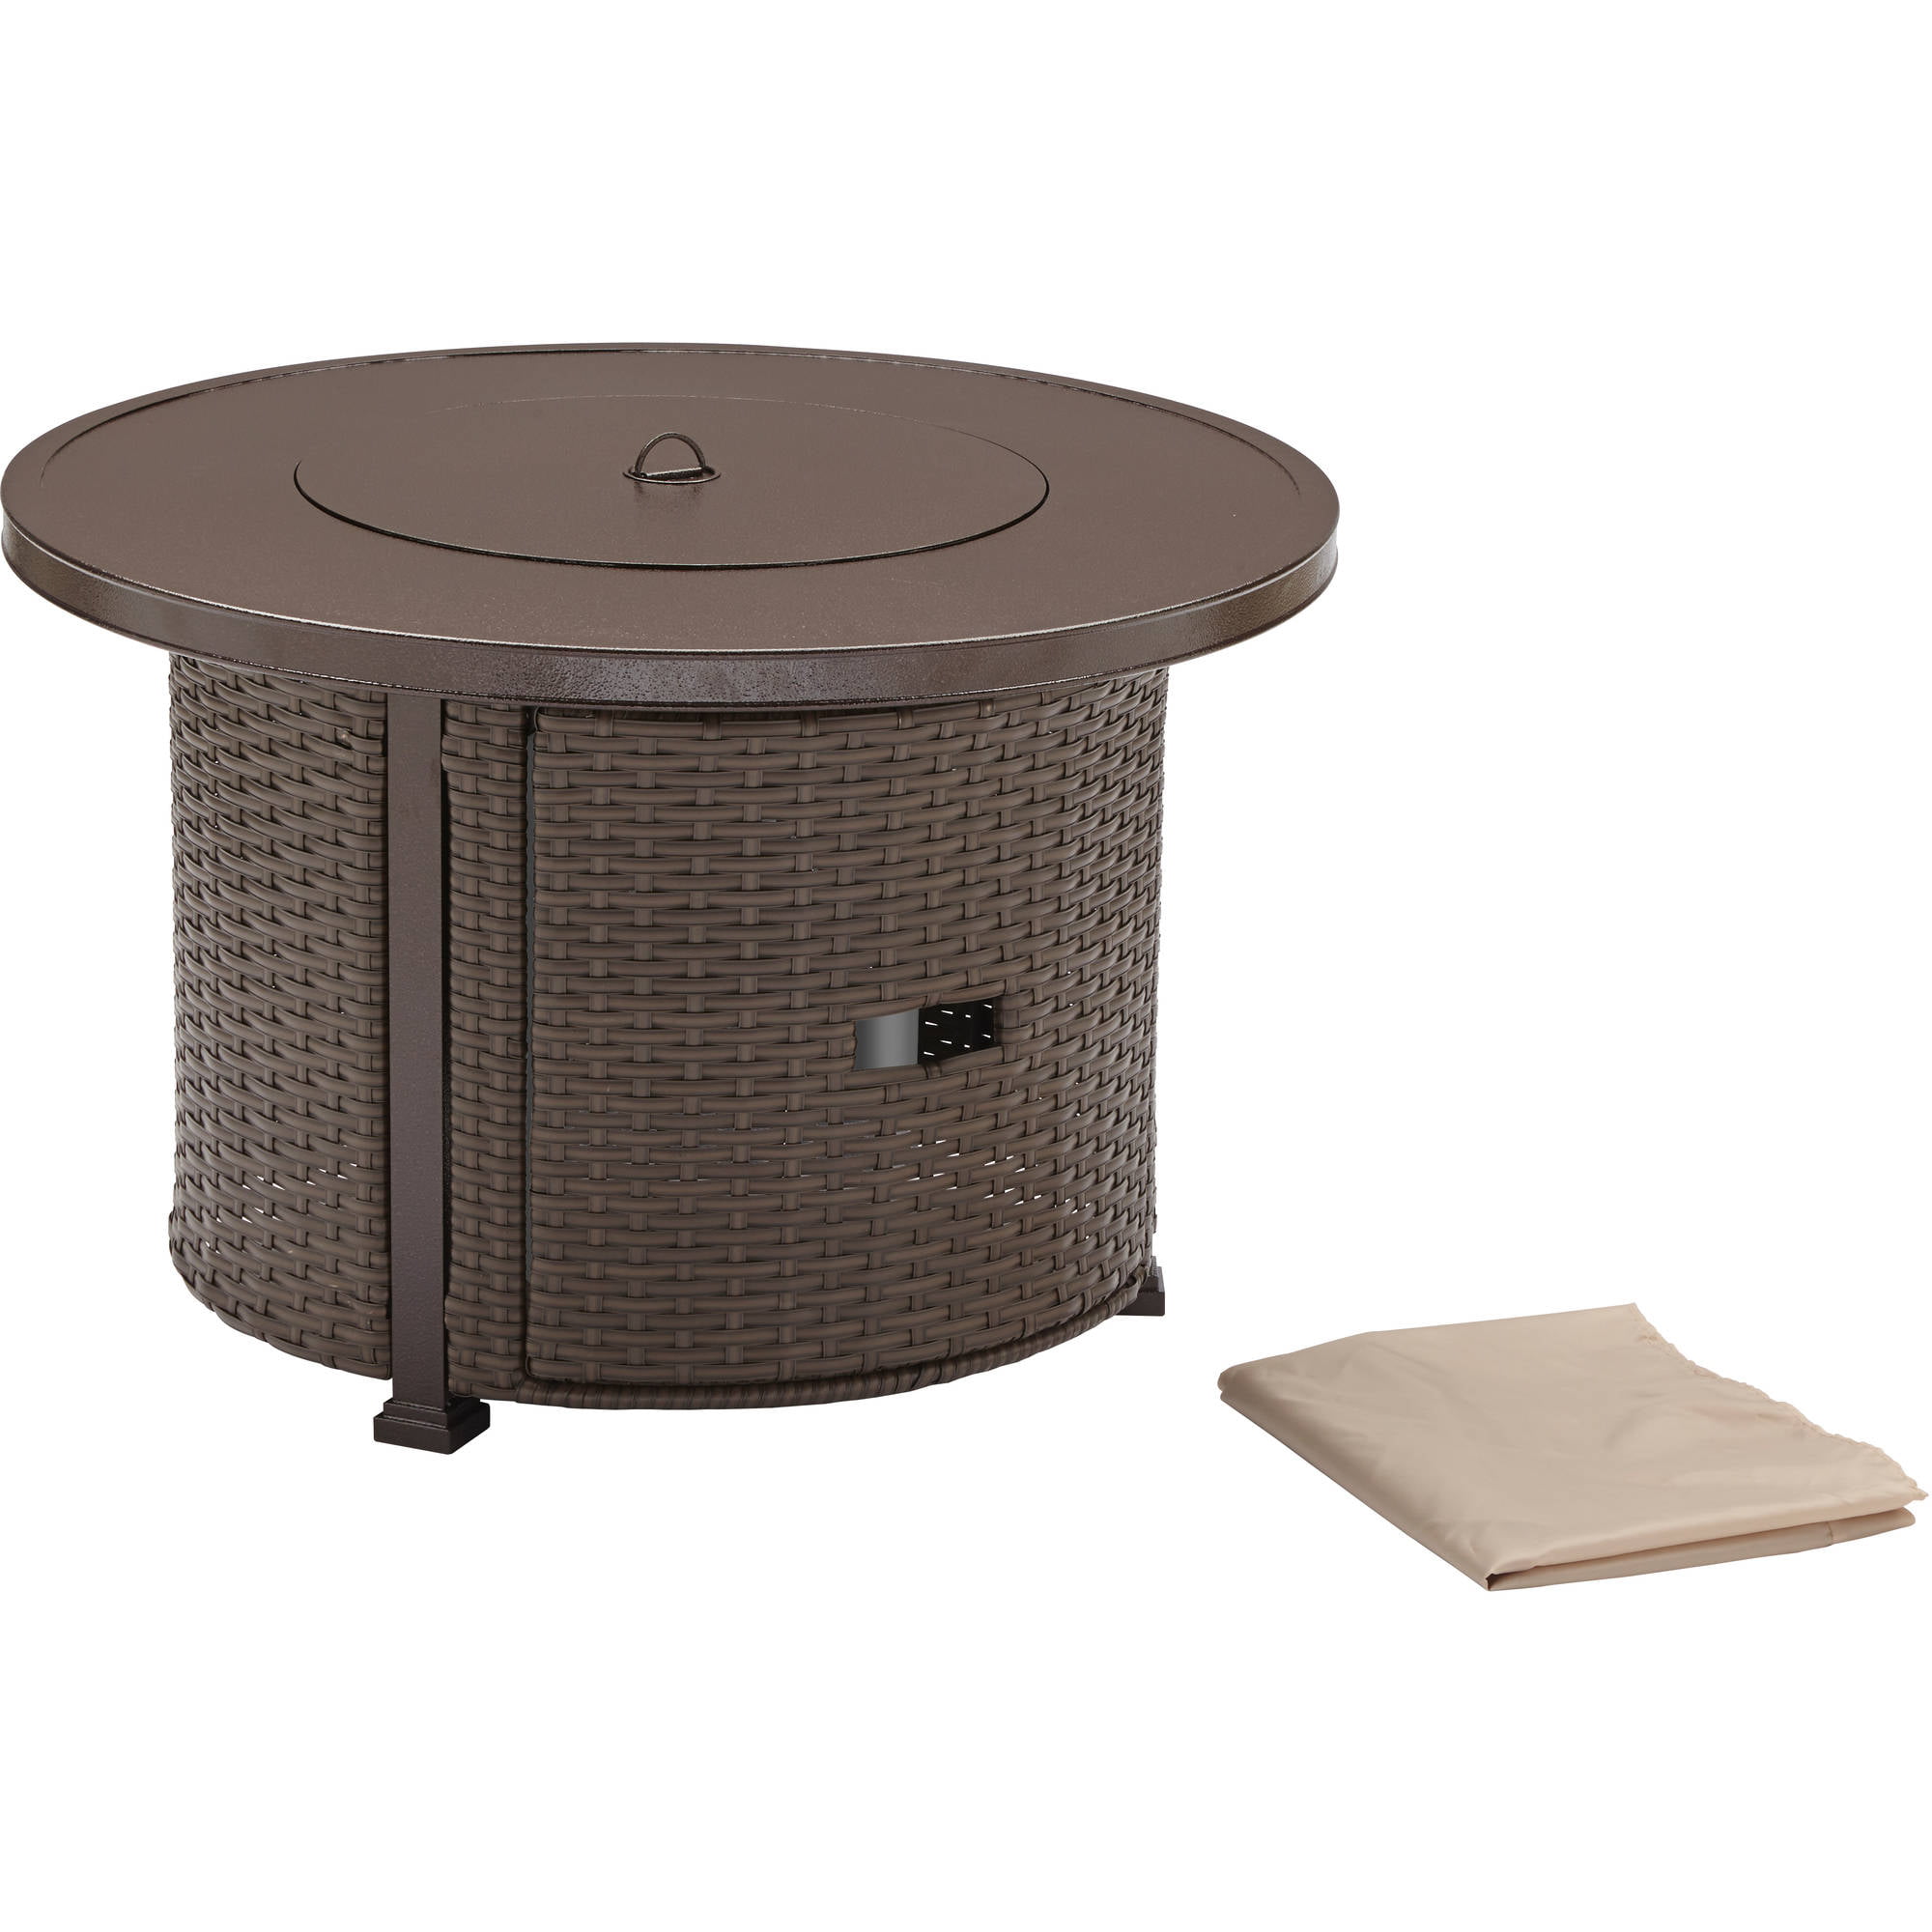 Gardens Colebrook 37 Inch Gas Fire Pit, Better Homes And Gardens Gas Fire Pit